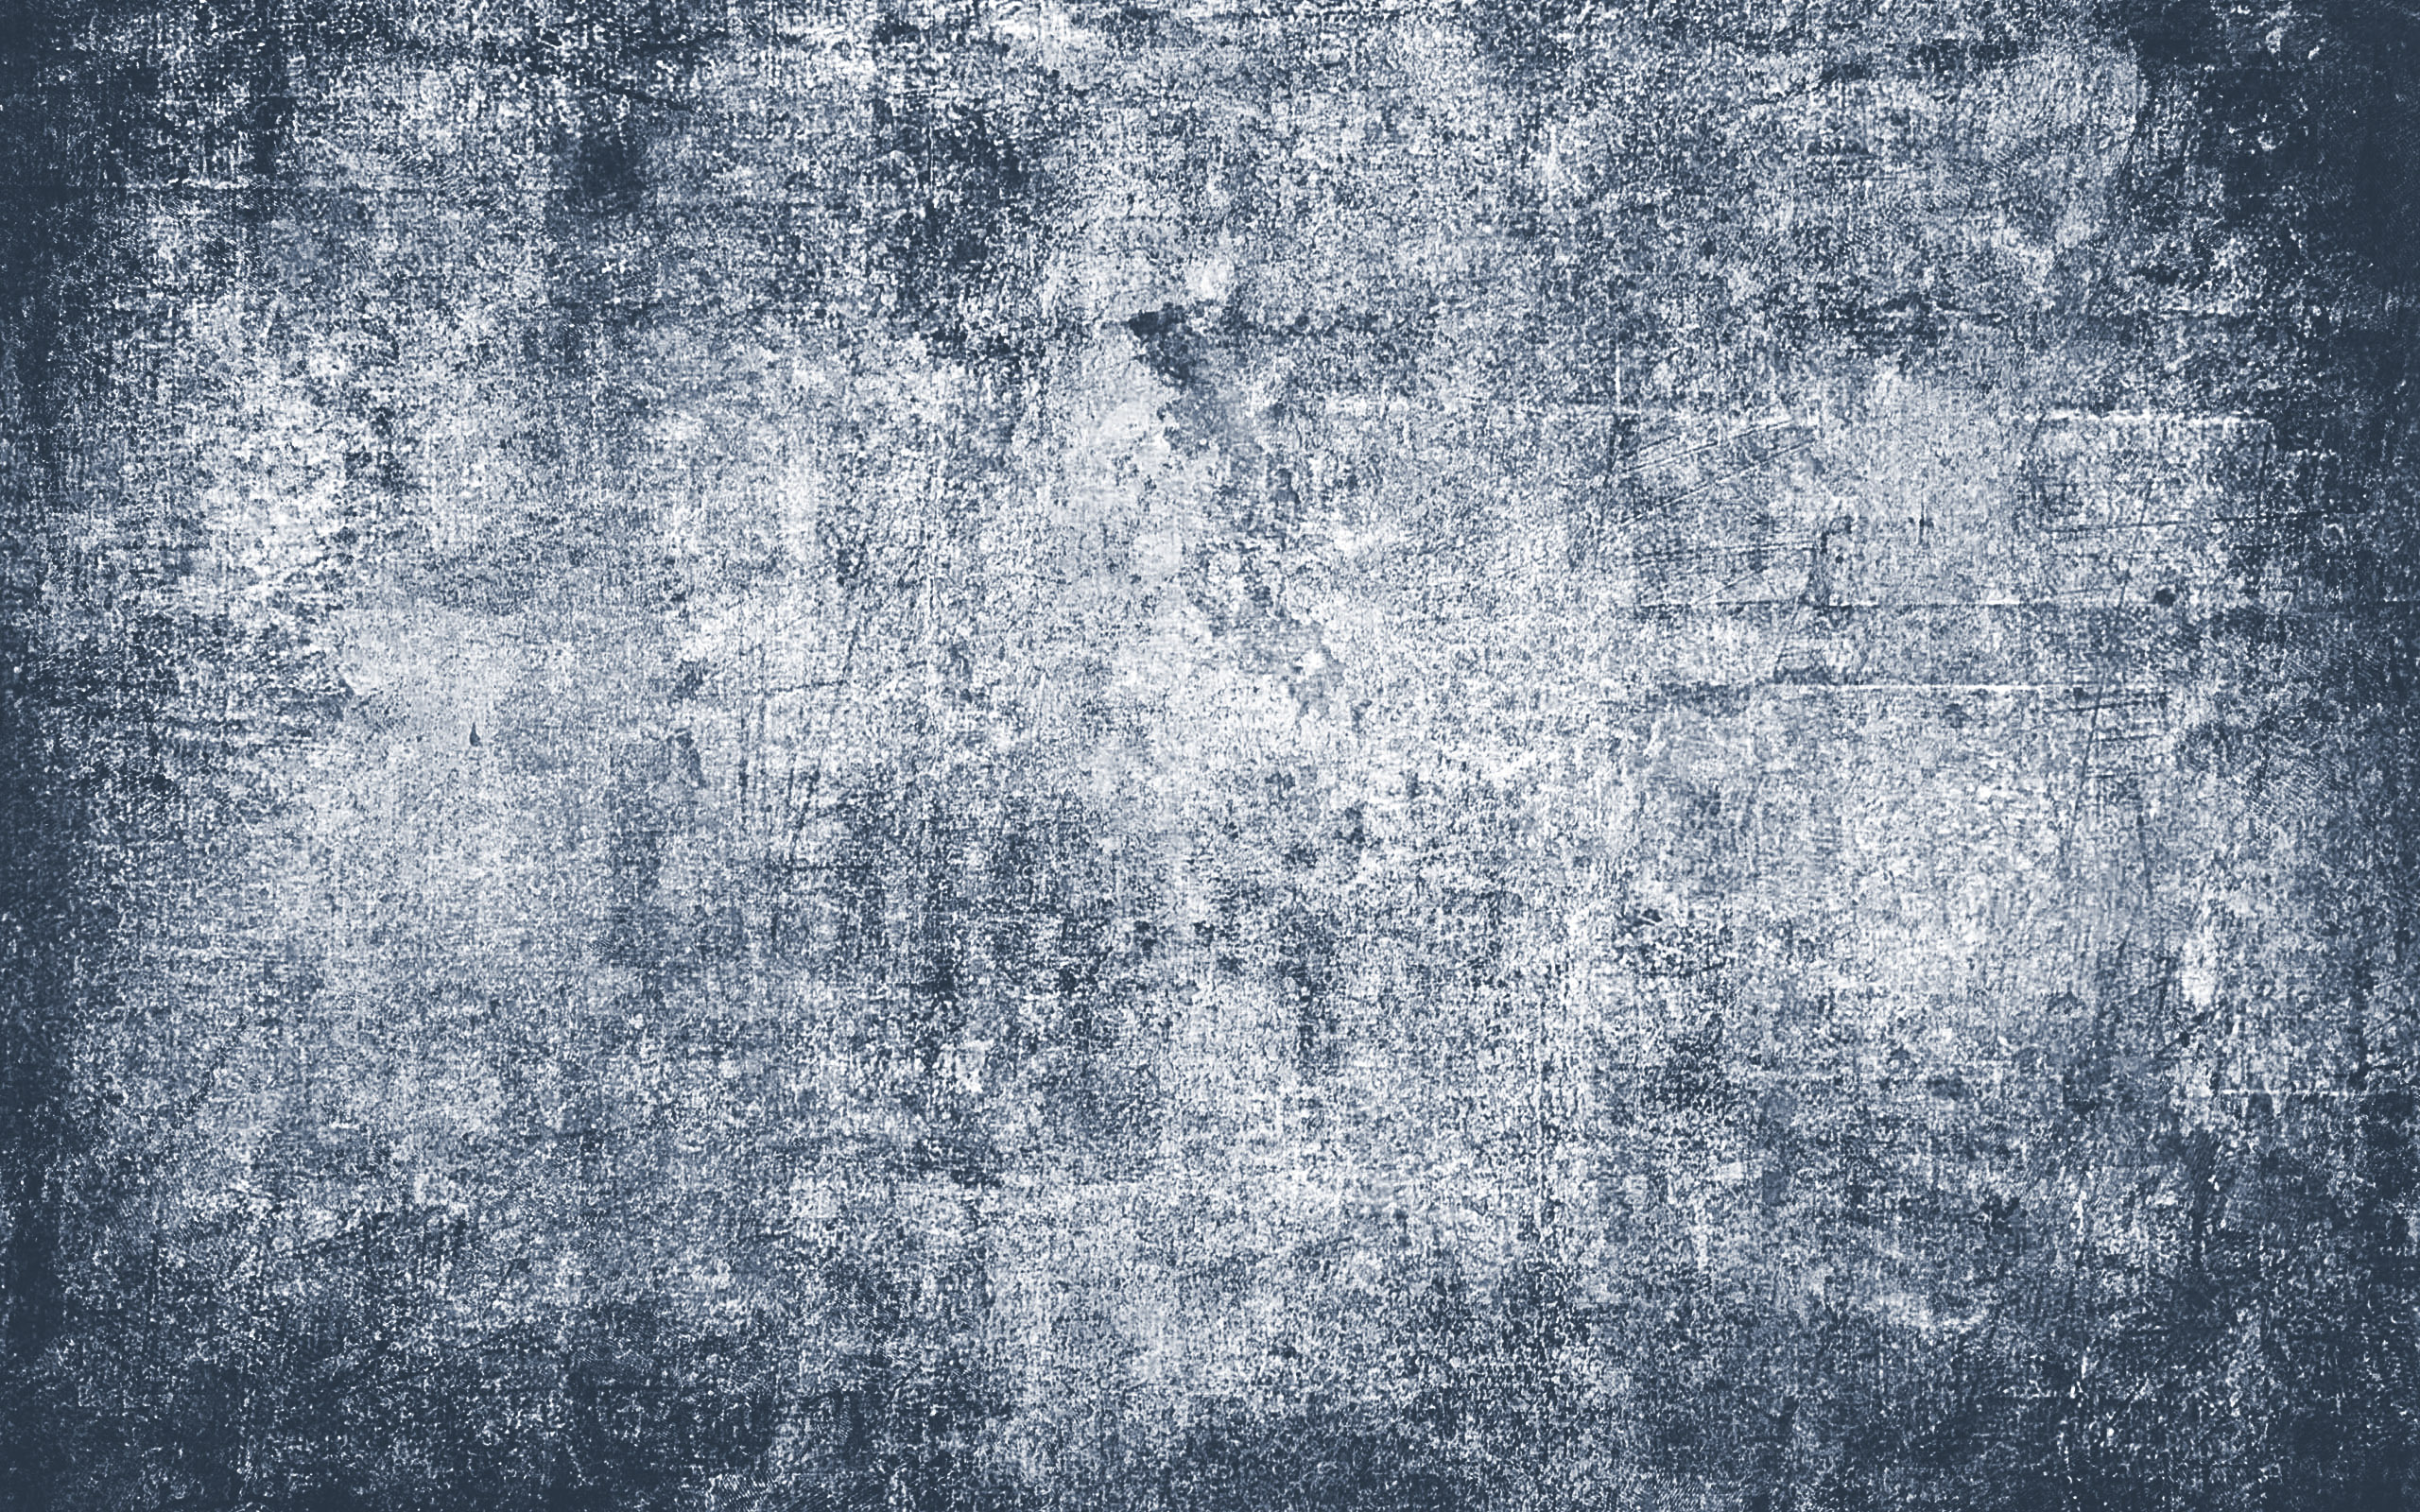 grunge-texture-16862BLUE | Crystal Arroyo Photography